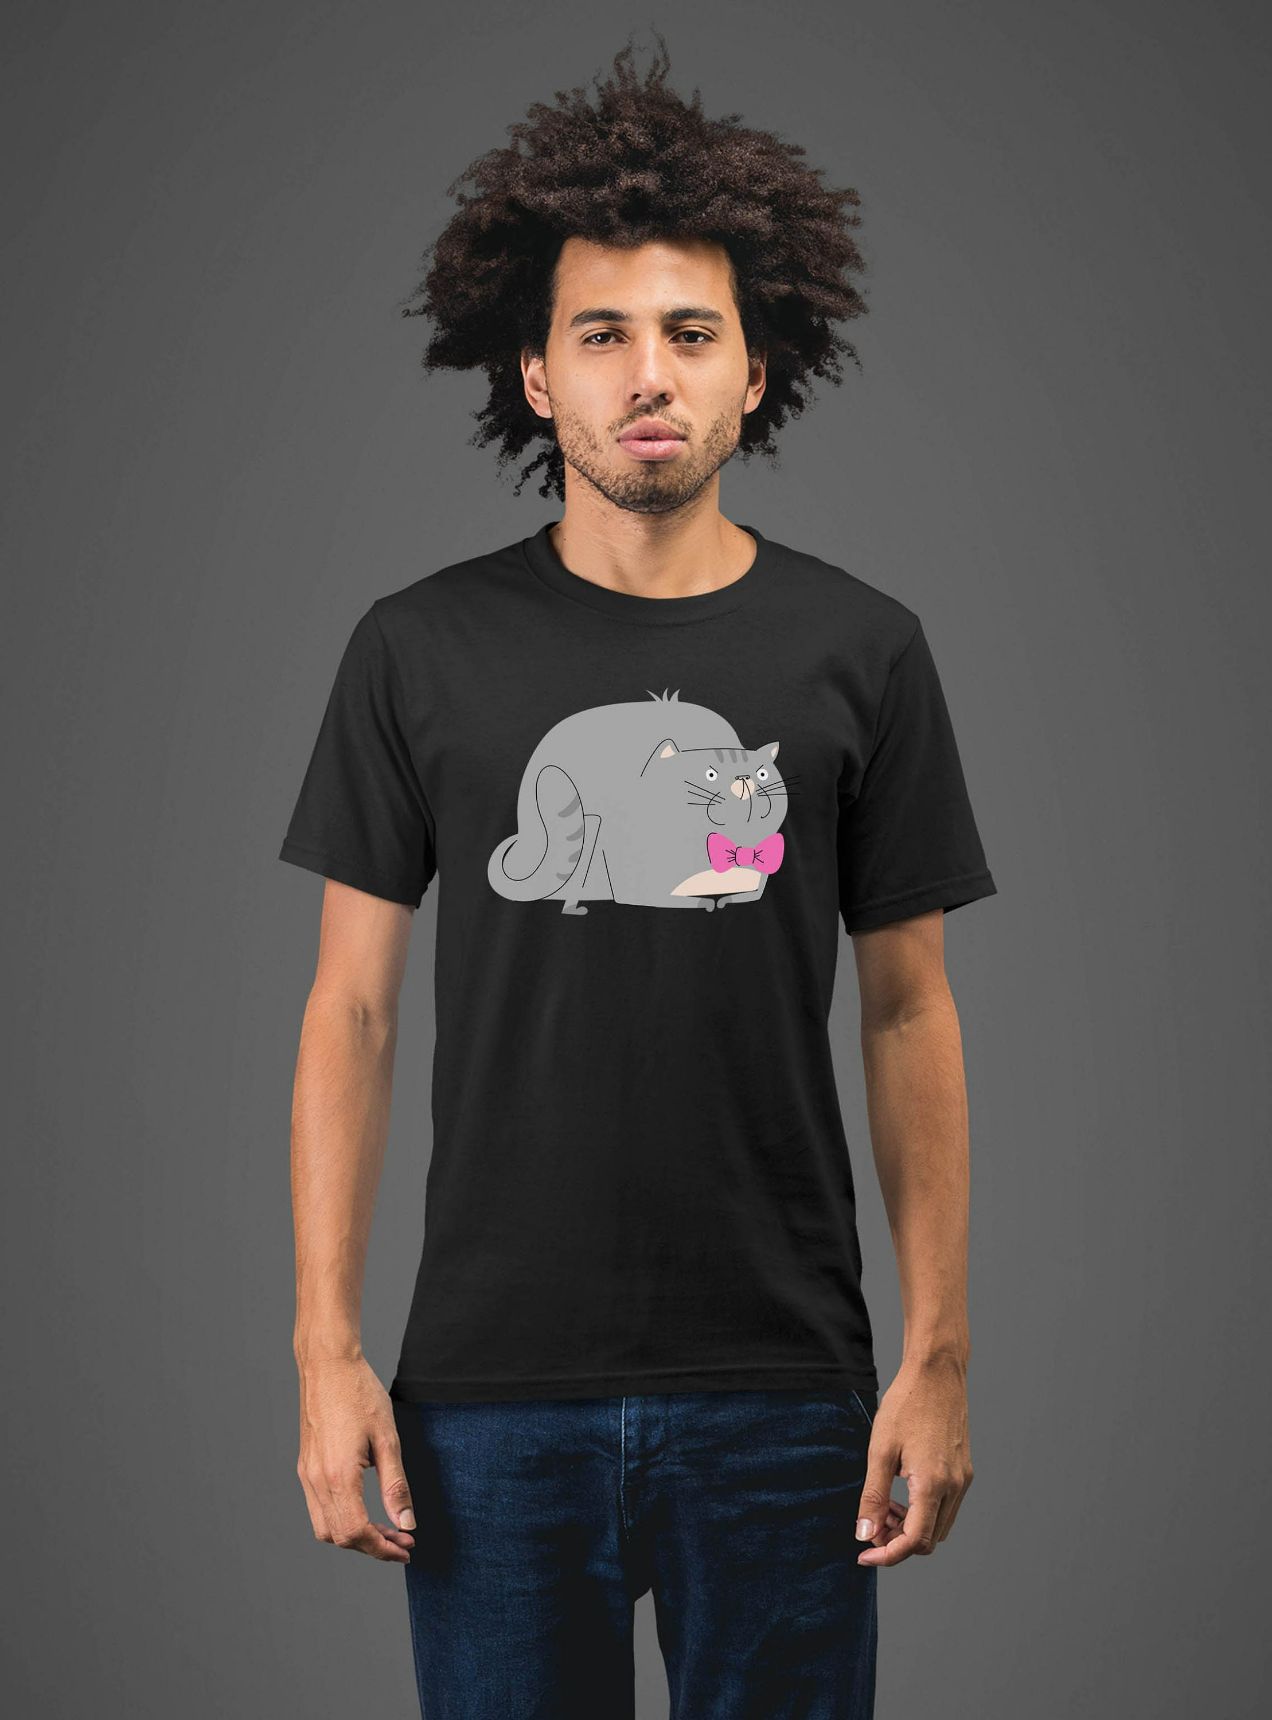 Moon Mouse Apparel Mean Grumpy Cat Unisex Adult Printed Cotton Crew T-Shirt